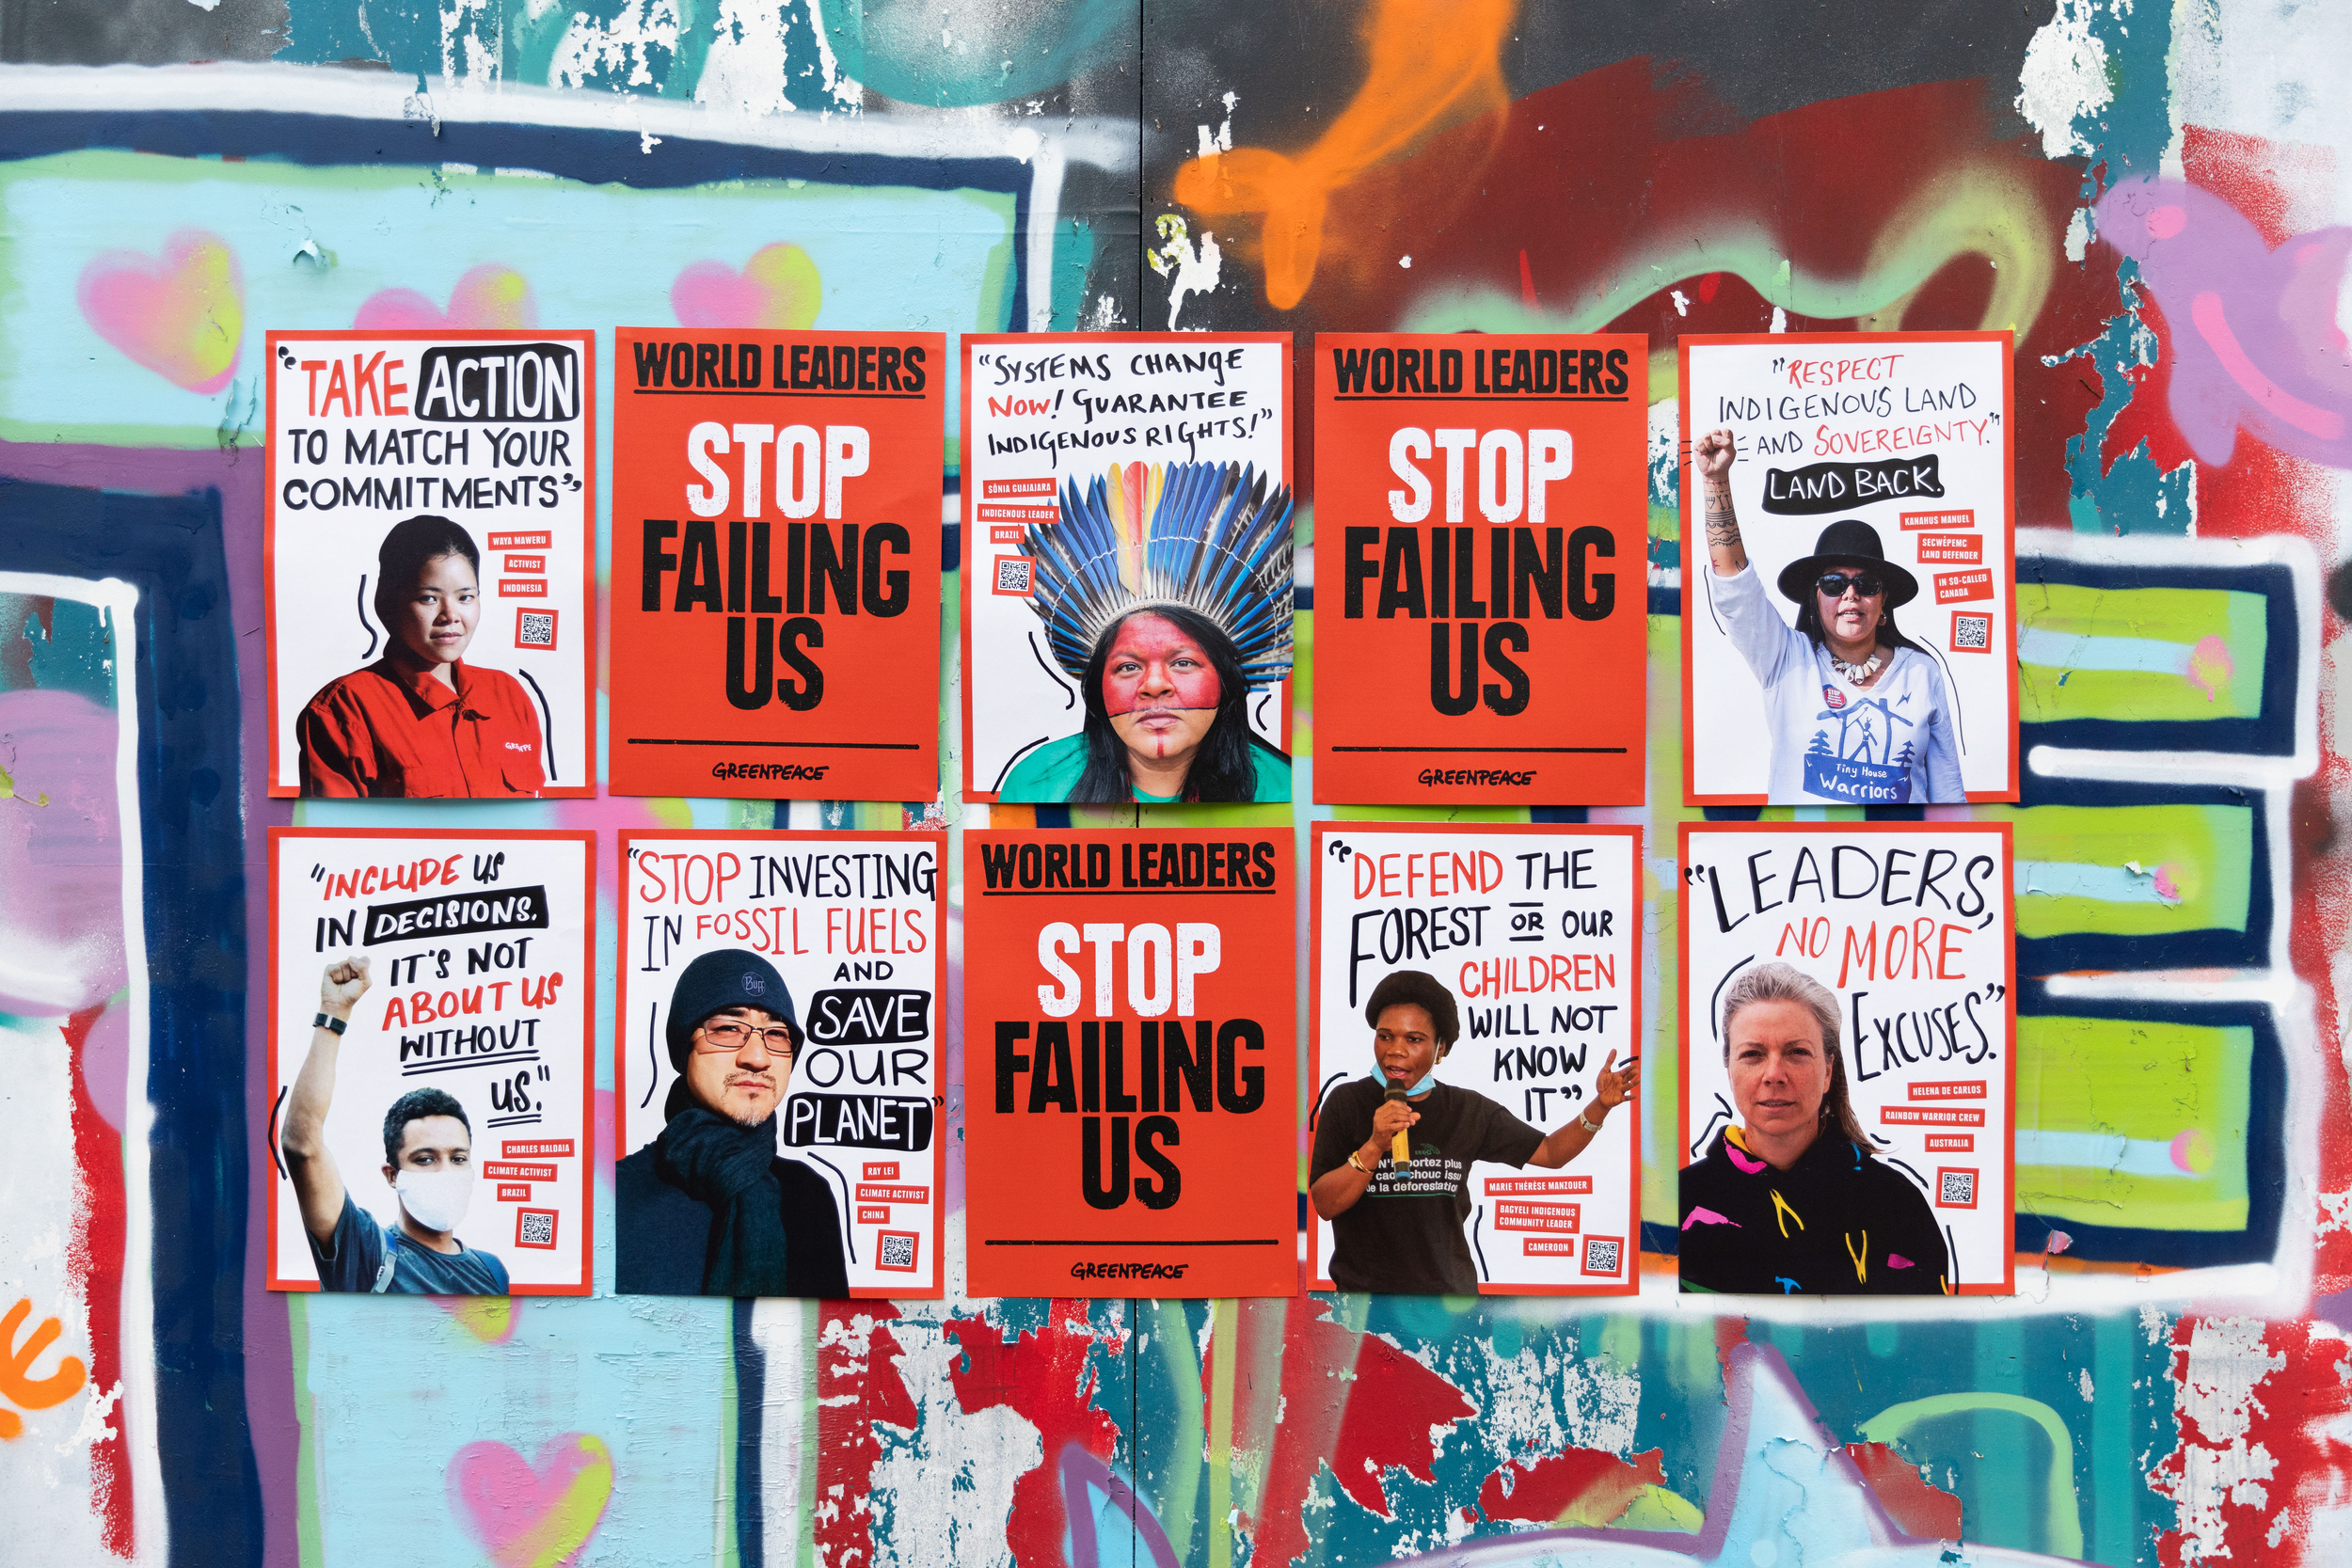 Posters featuring portraits of climate-impacted people from around the world are arranged in a grid on a graffiti covered wall outdoors. The portraits are interspersed with slogans and testimonials, with 'Stop failing us' appearing prominently.